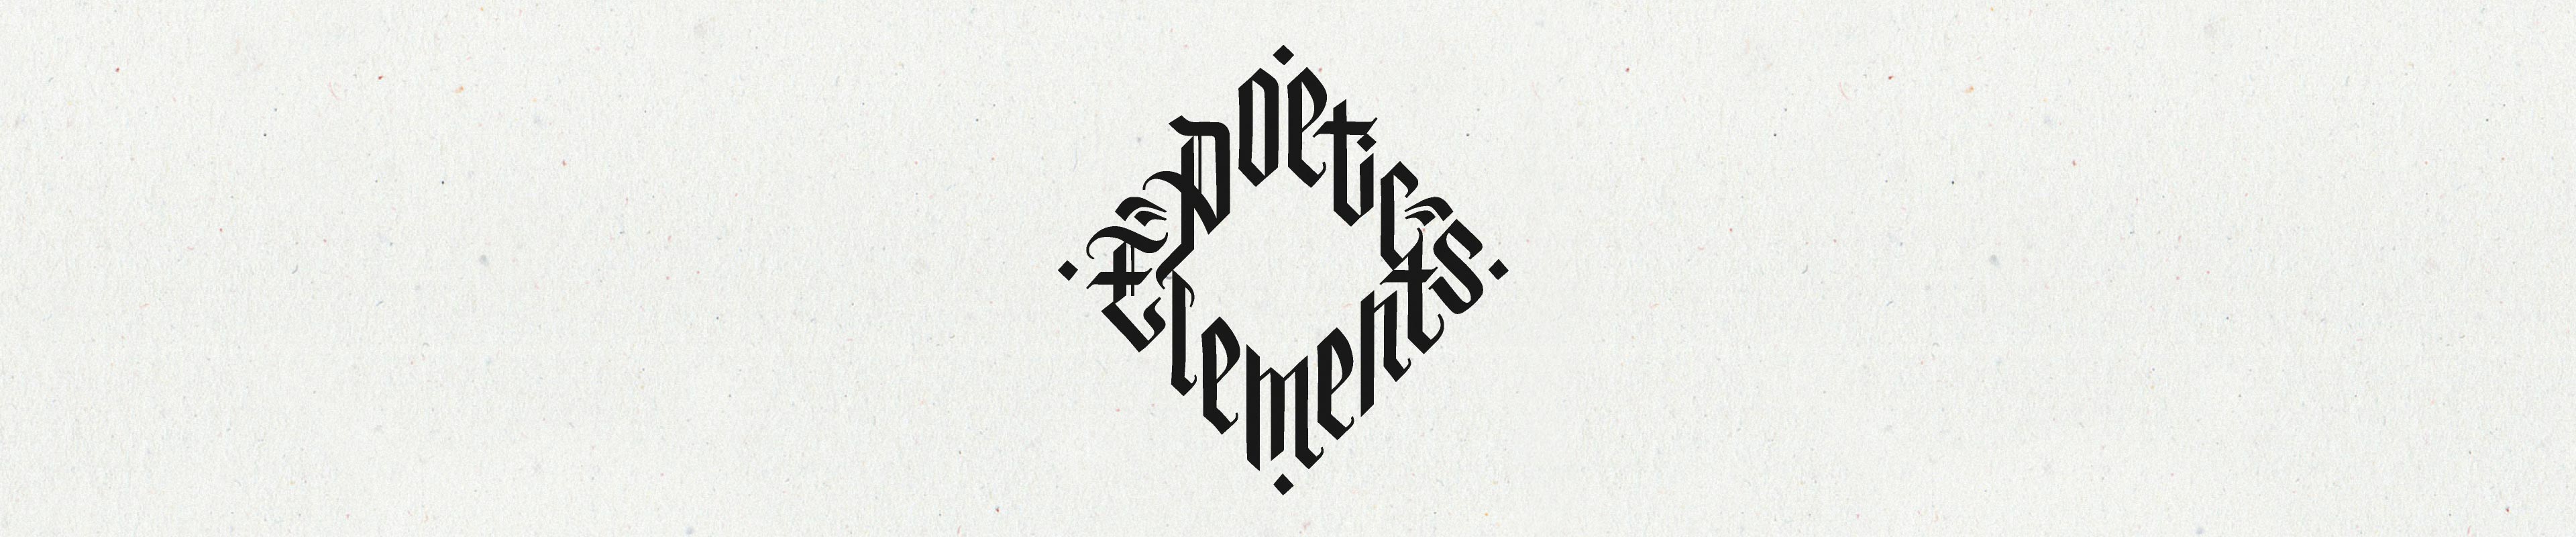 Logo for Poetic Elements on a textured paper background